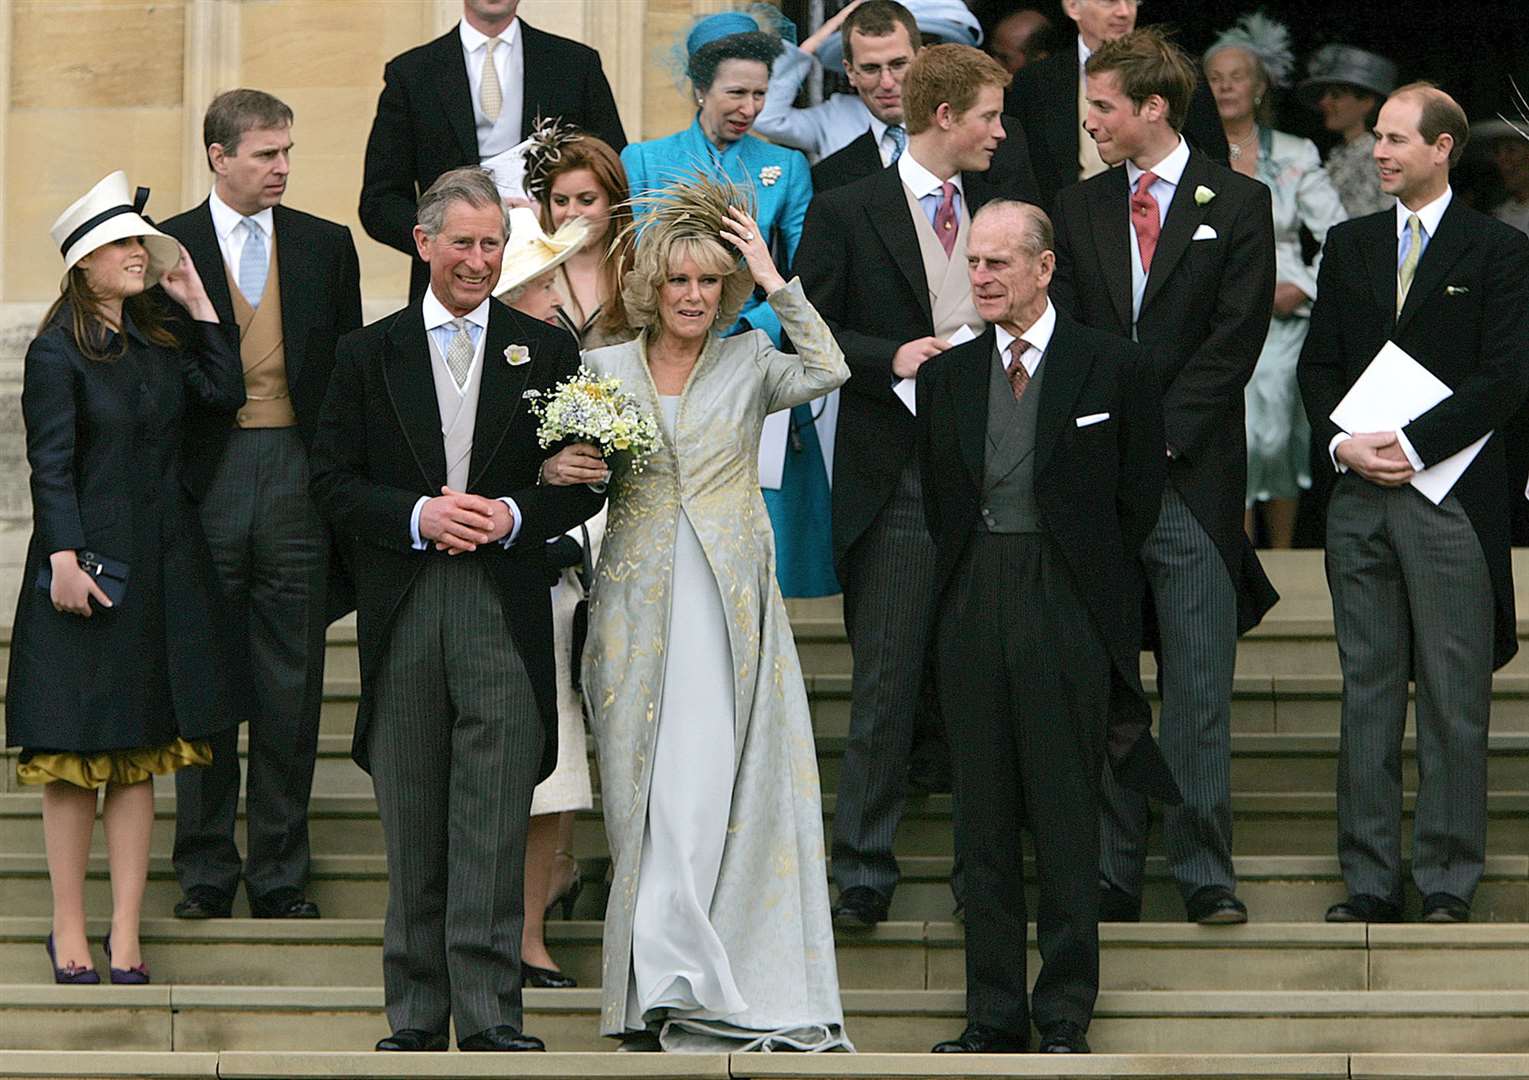 The newlywed prince and duchess after their blessing in St George’s Chapel in 2005 (Alastair Grant/PA)